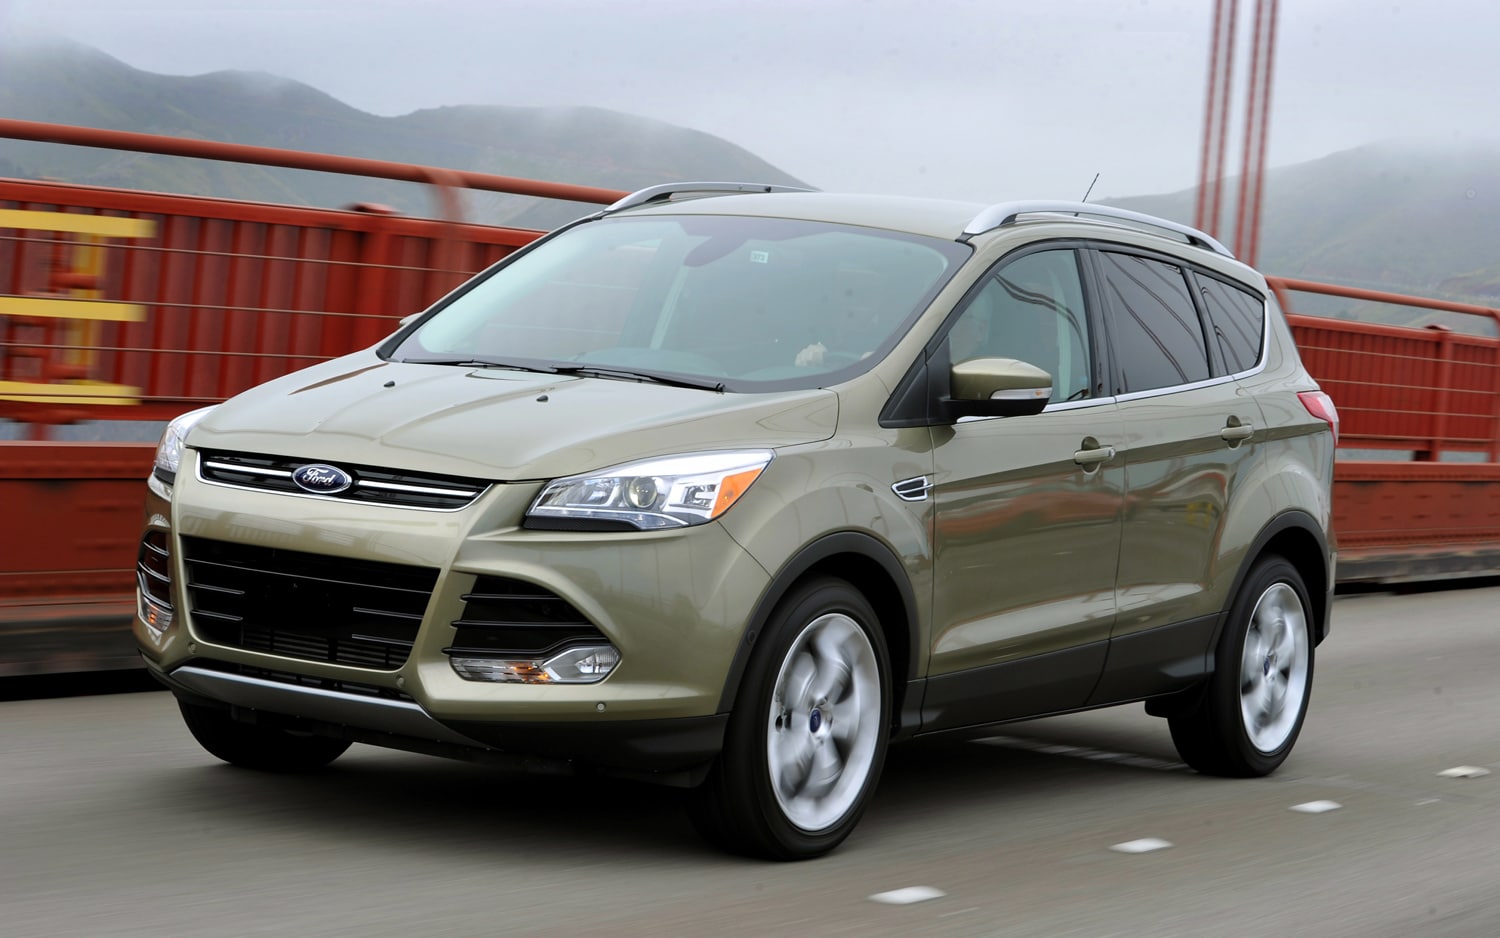 2013 Ford Escape EcoBoost First Drive